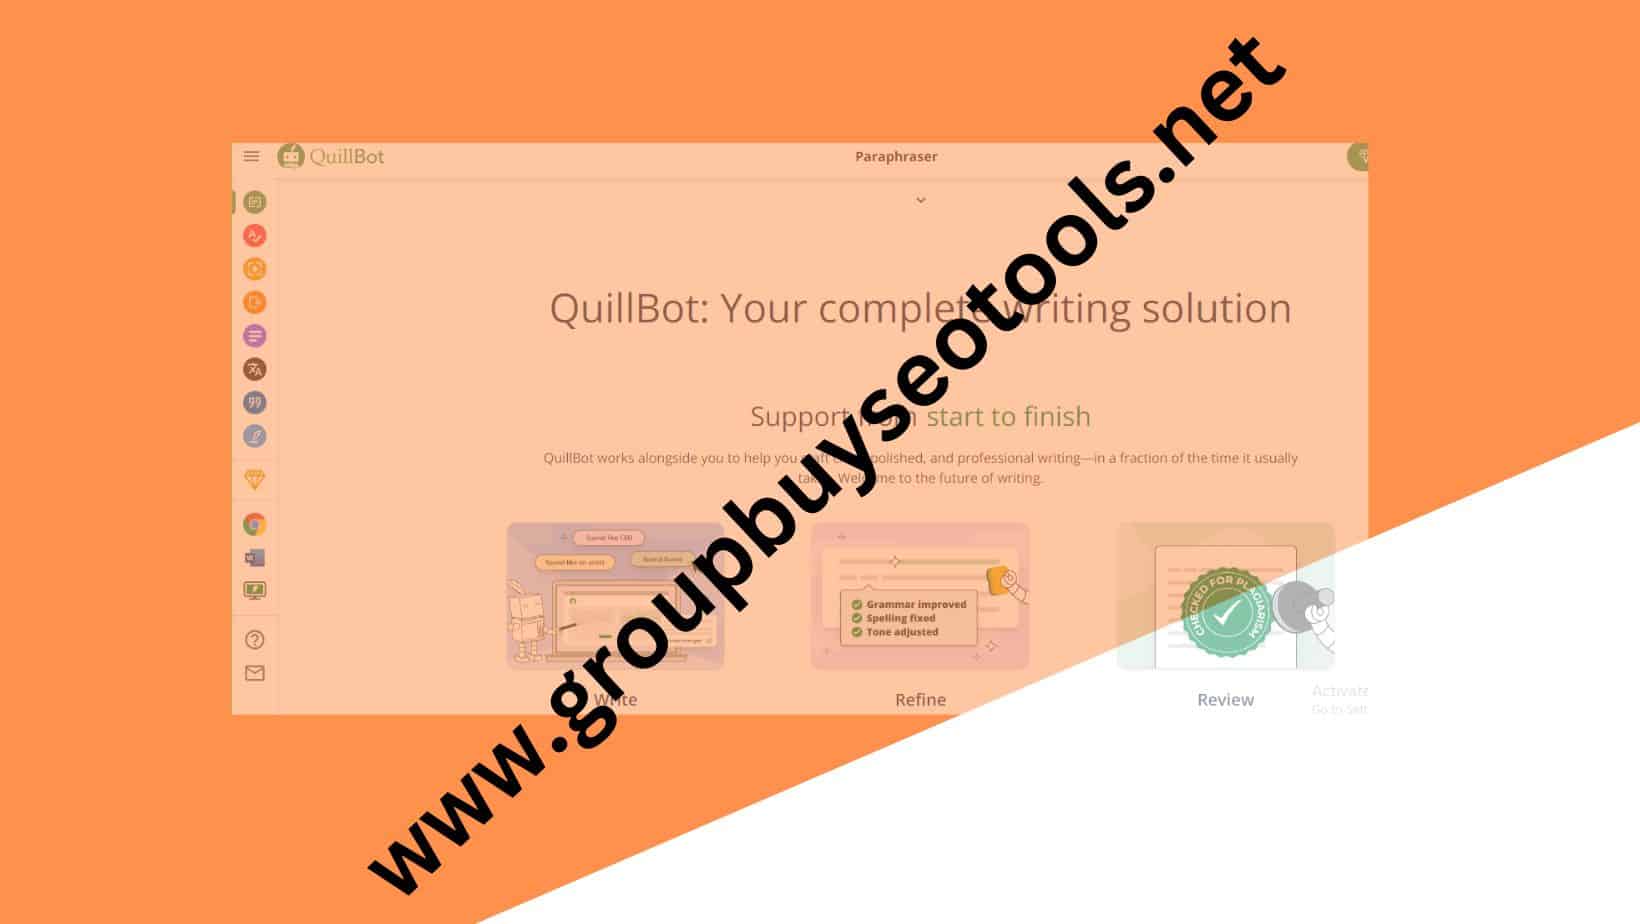 quillbot Review